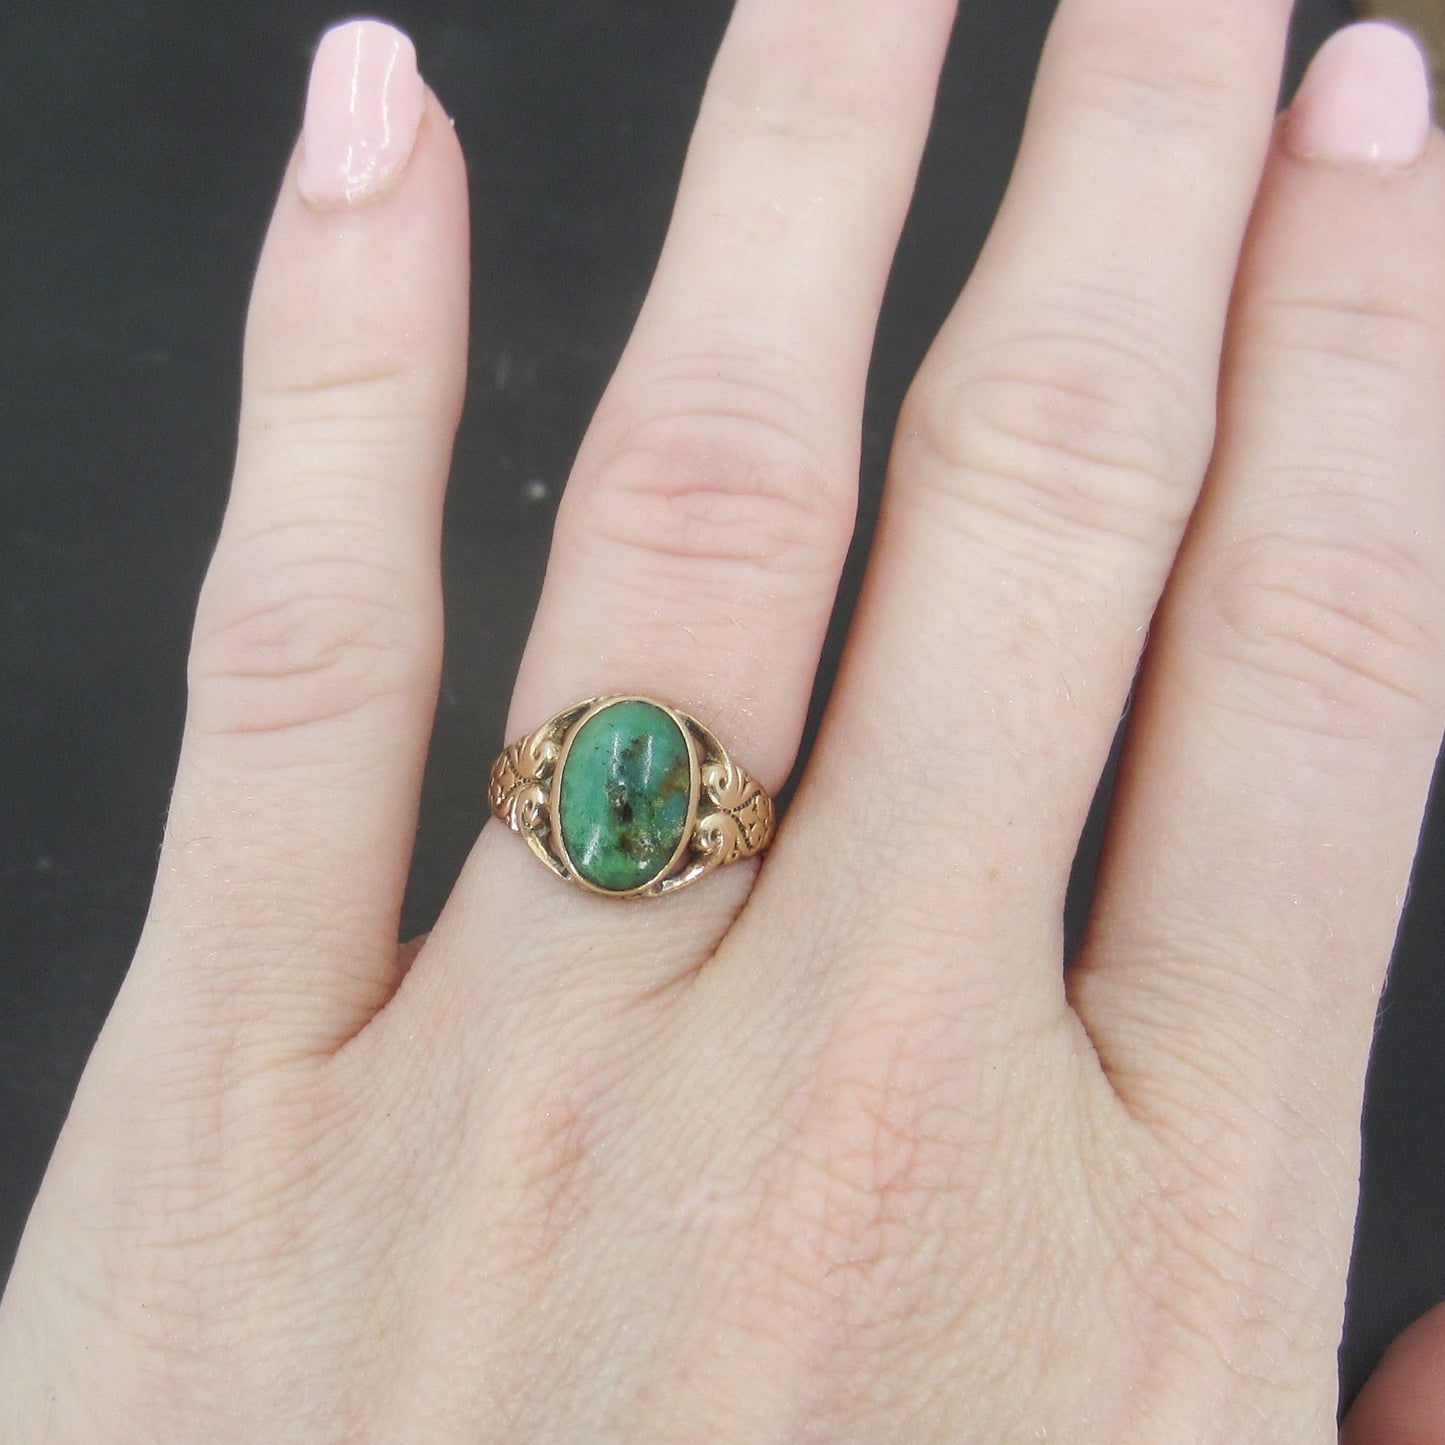 SOLD--Art Deco Turquoise Signet Ring 10k, Ostby & Barton c. 1930